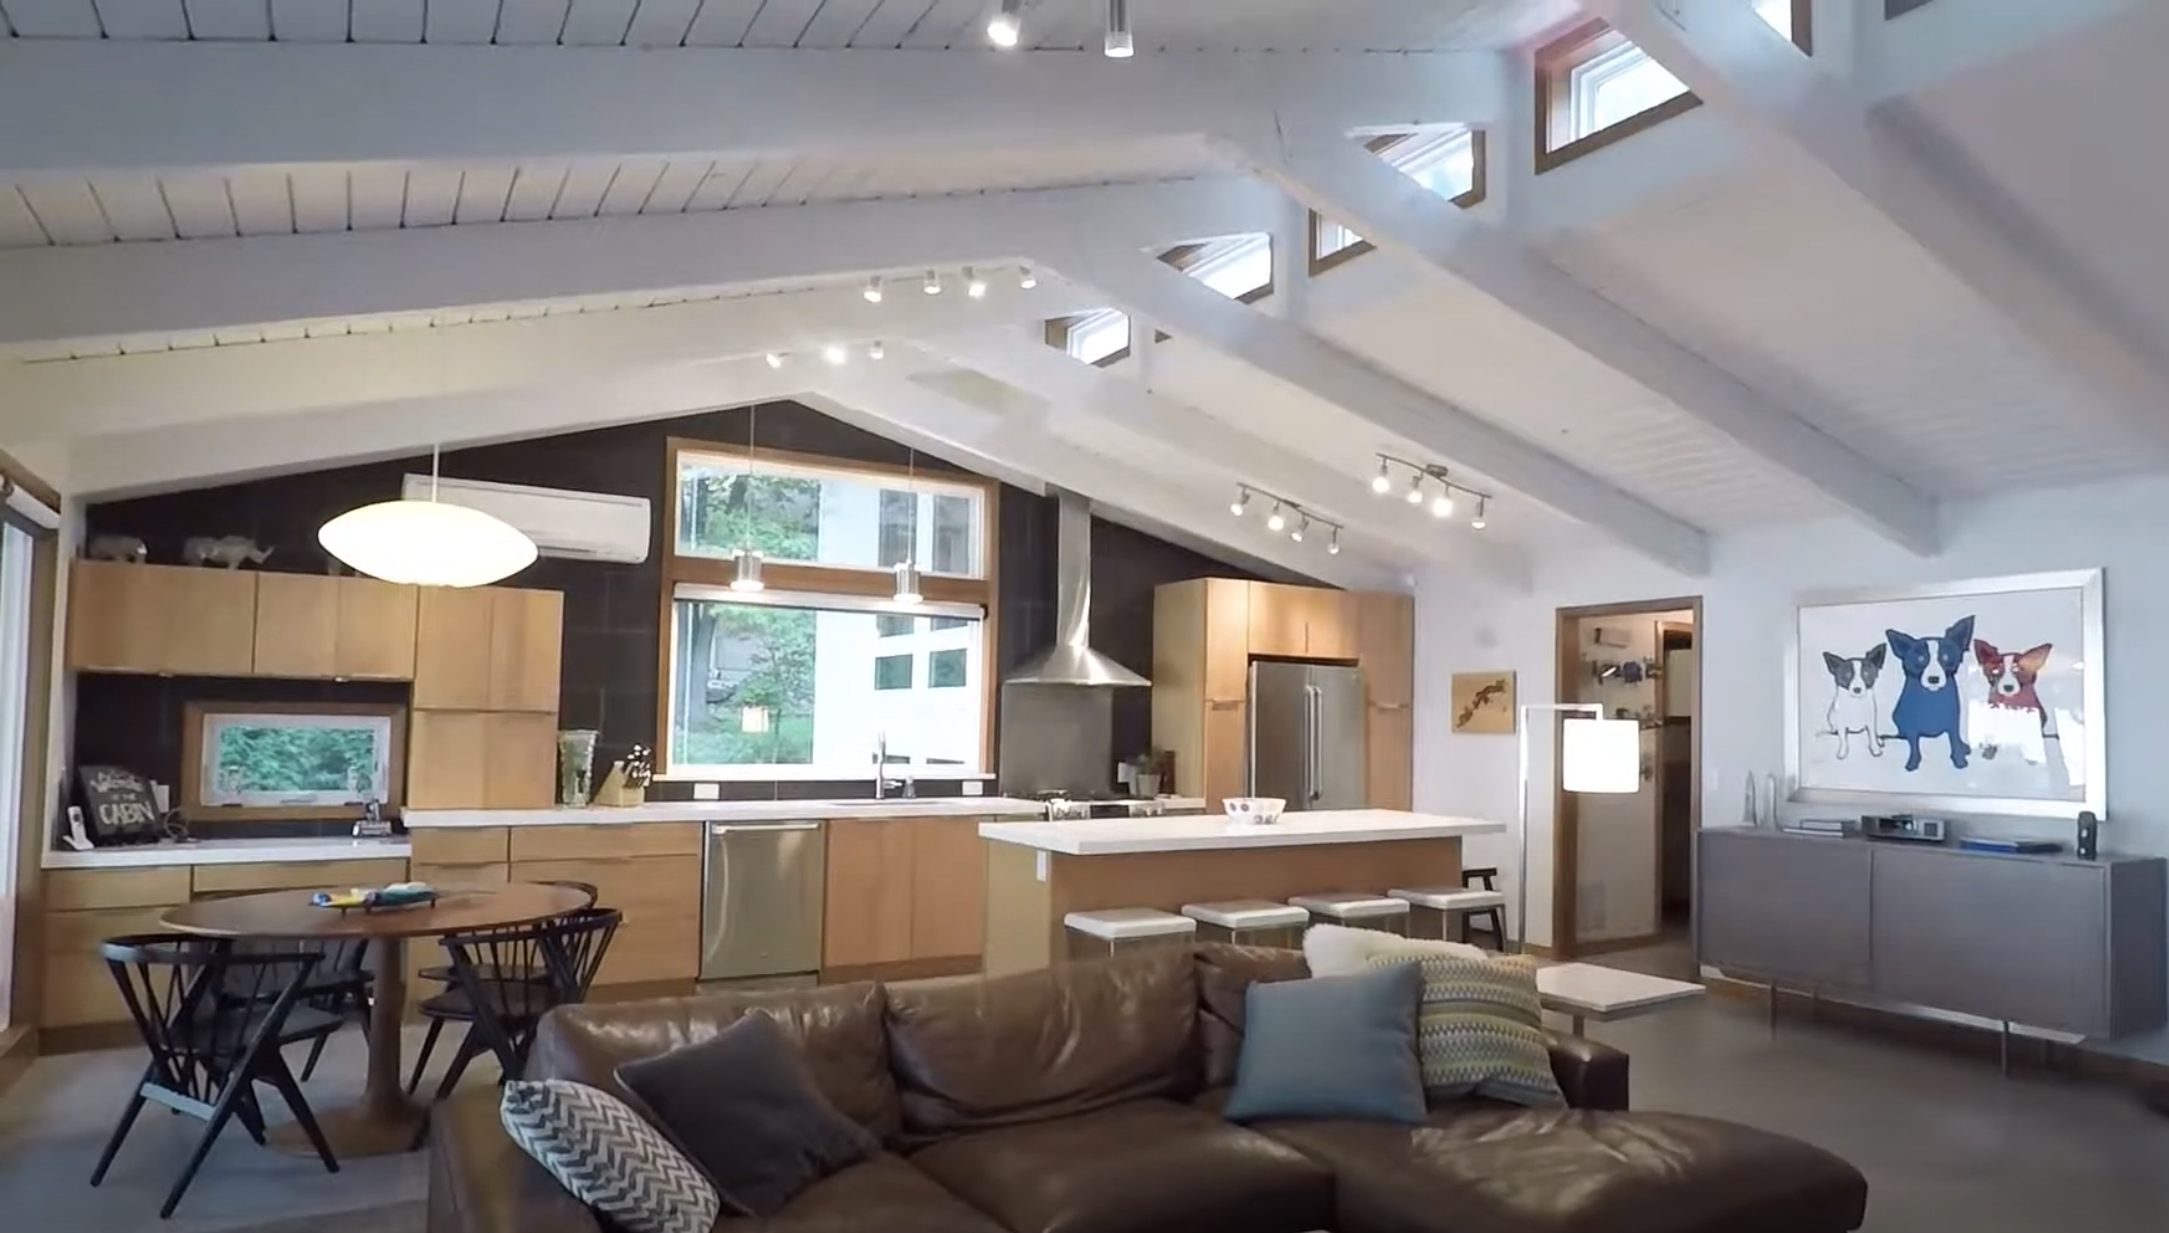 A custom home build video series showcasing a stunning living room and kitchen with vaulted ceilings.